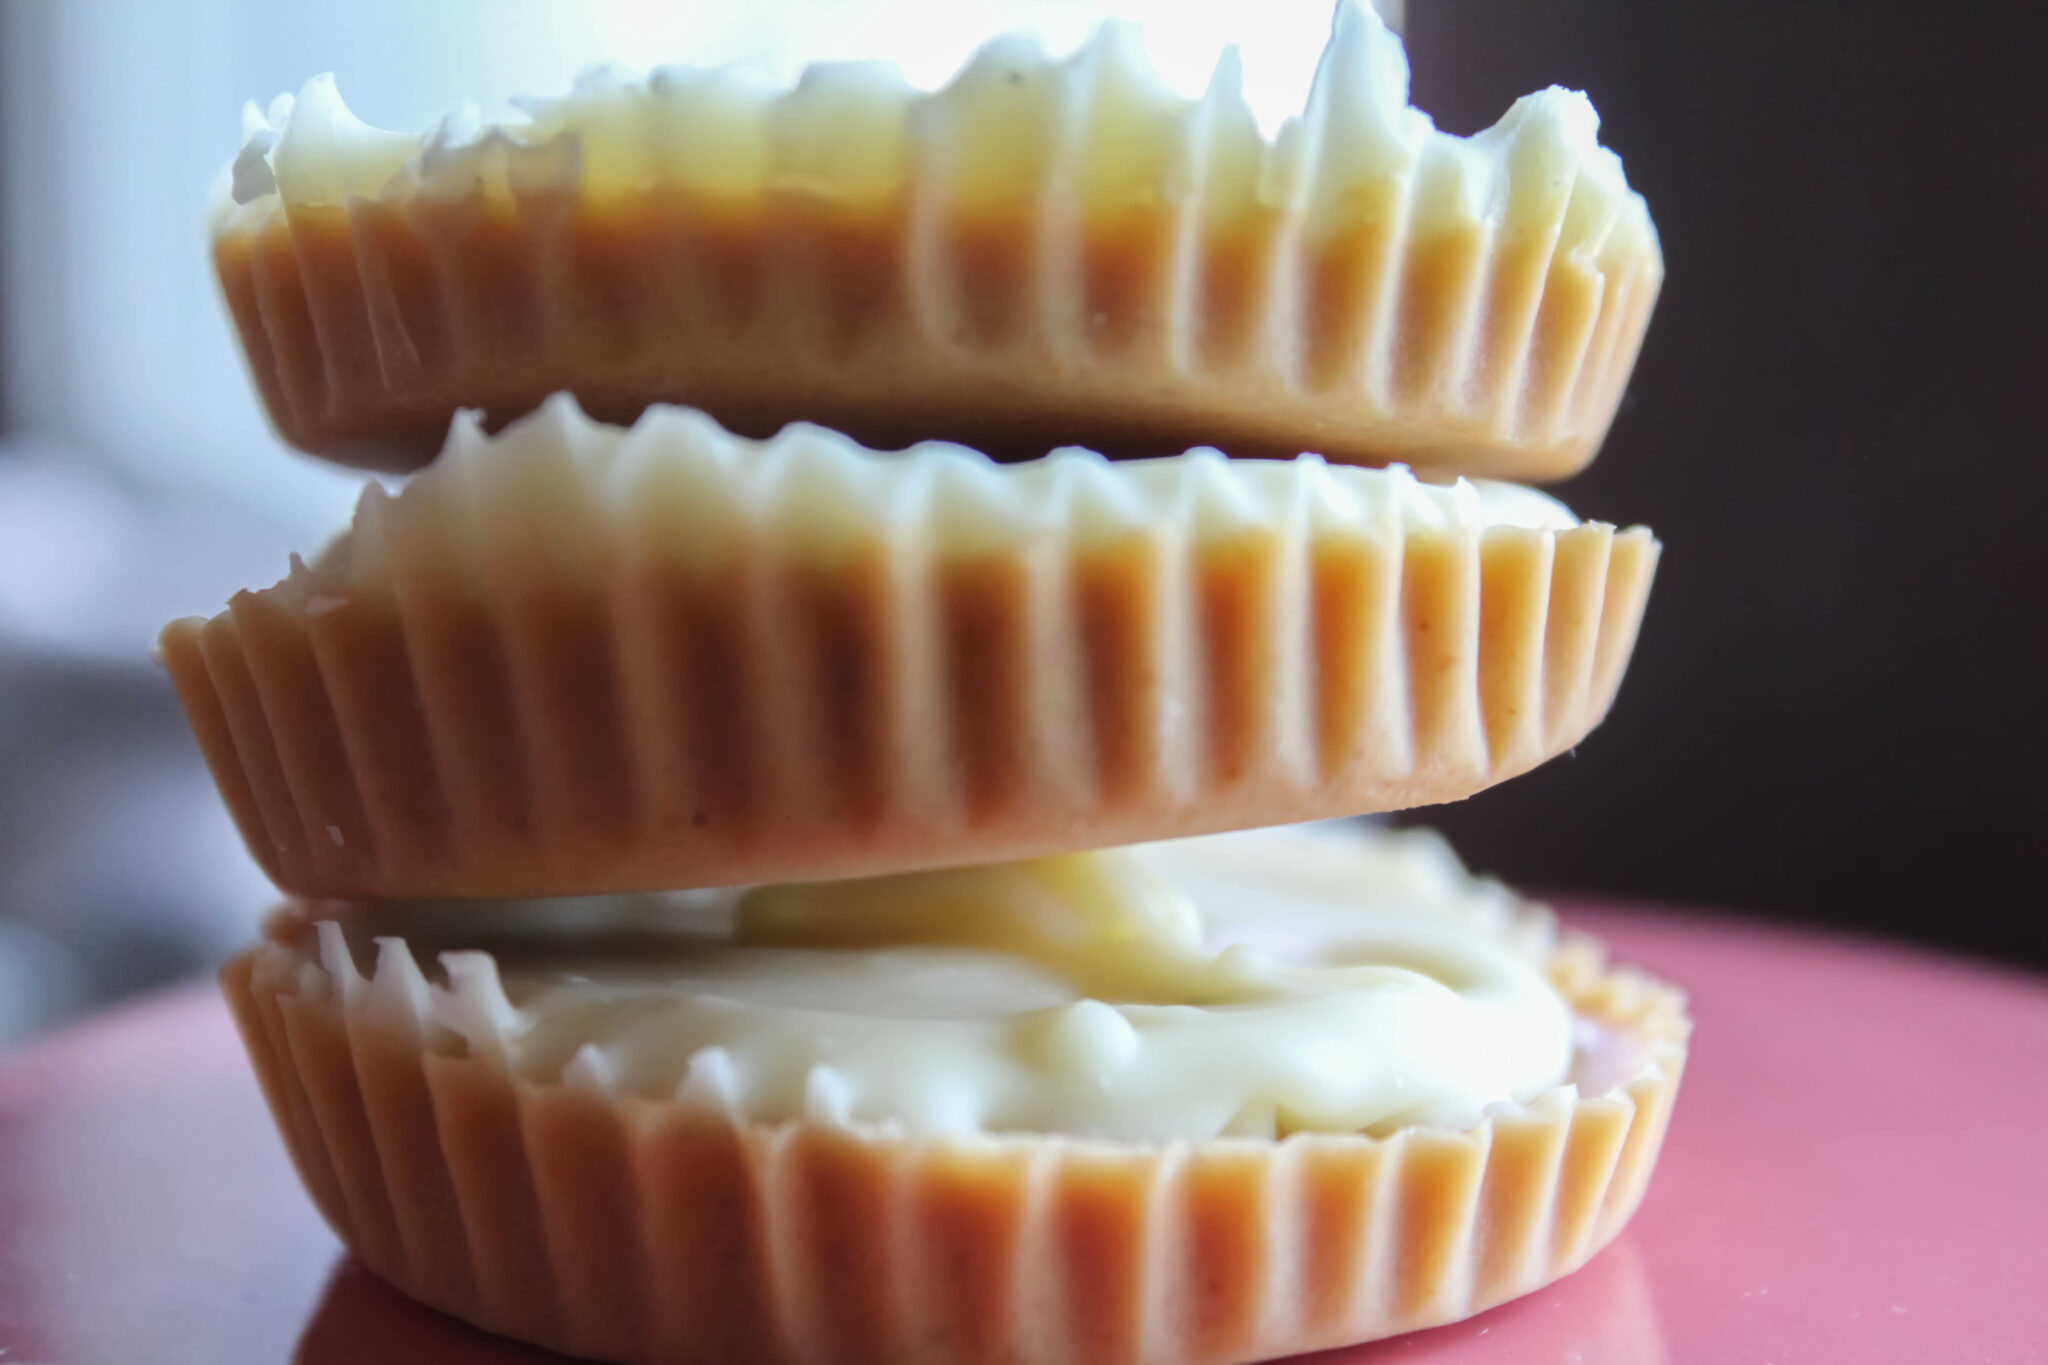 My White Chocolate Peanut Butter Cups are deceivingly easy to make and are sure to ward off any sugar cravings. They're THM:S, keto and sugar-free.